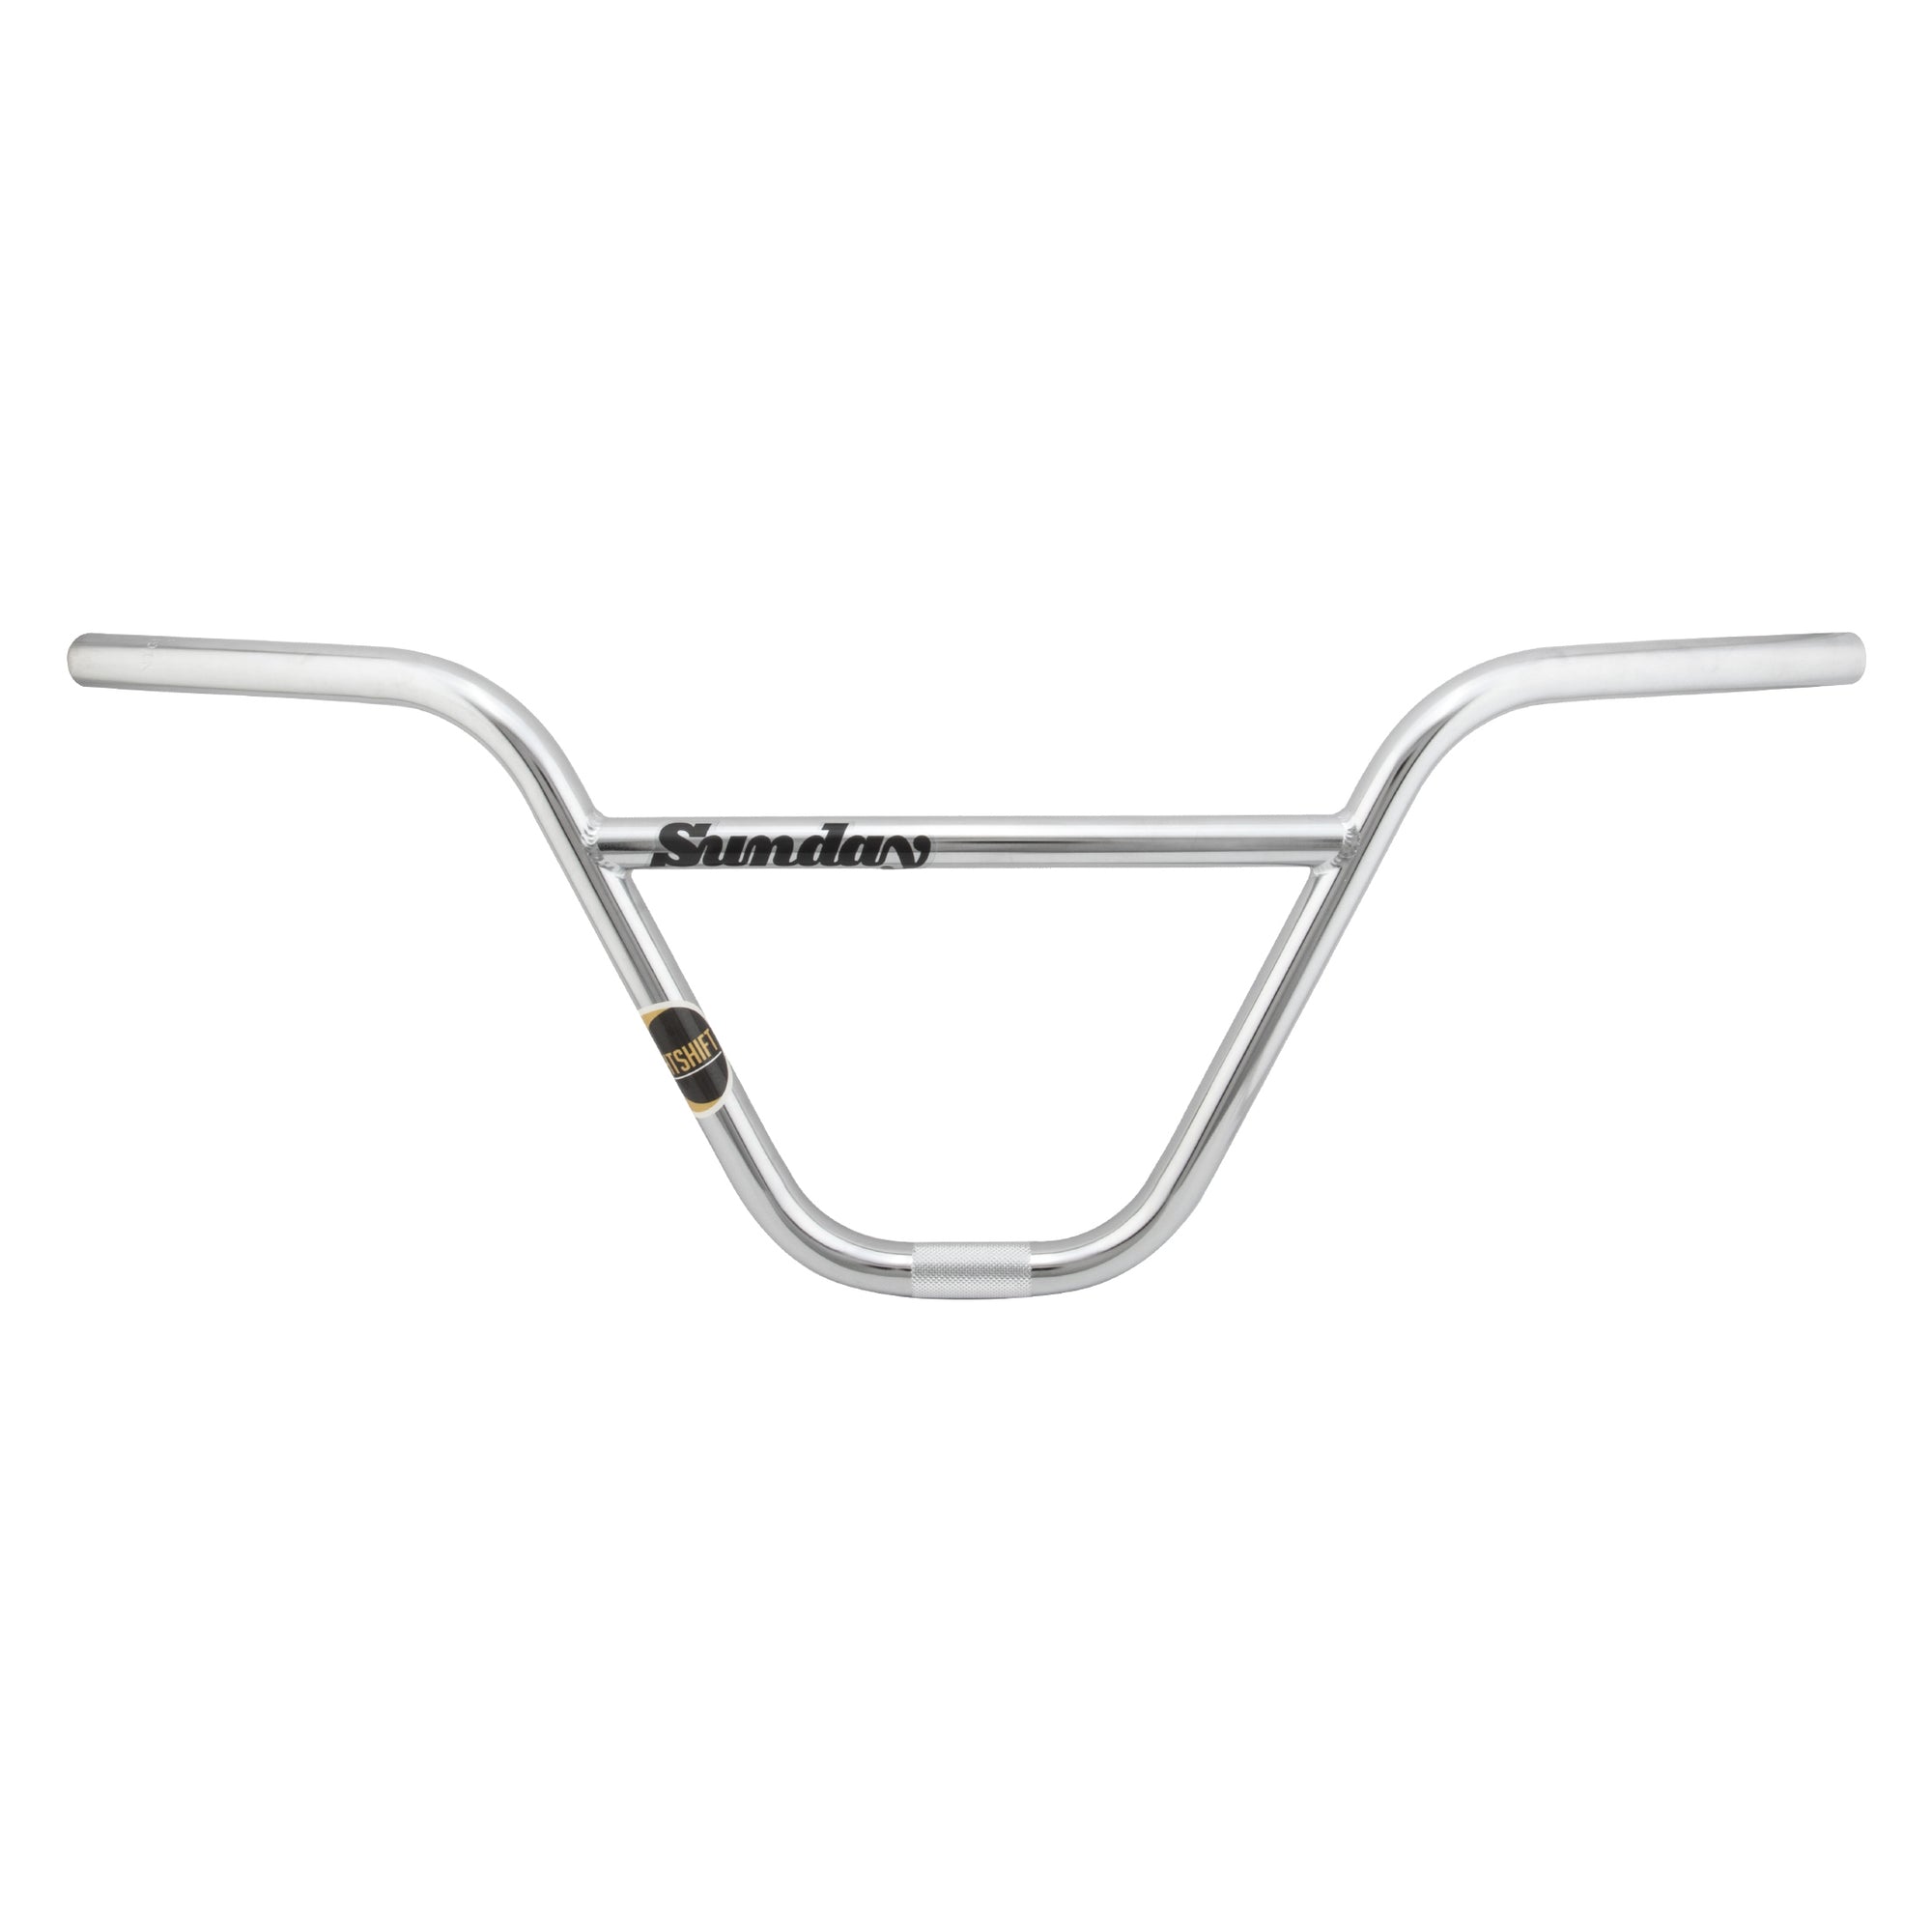 Sunday Nightshift 9.625" Handlebar - Rust Proof Black Or Chrome - Downtown Bicycle Works 